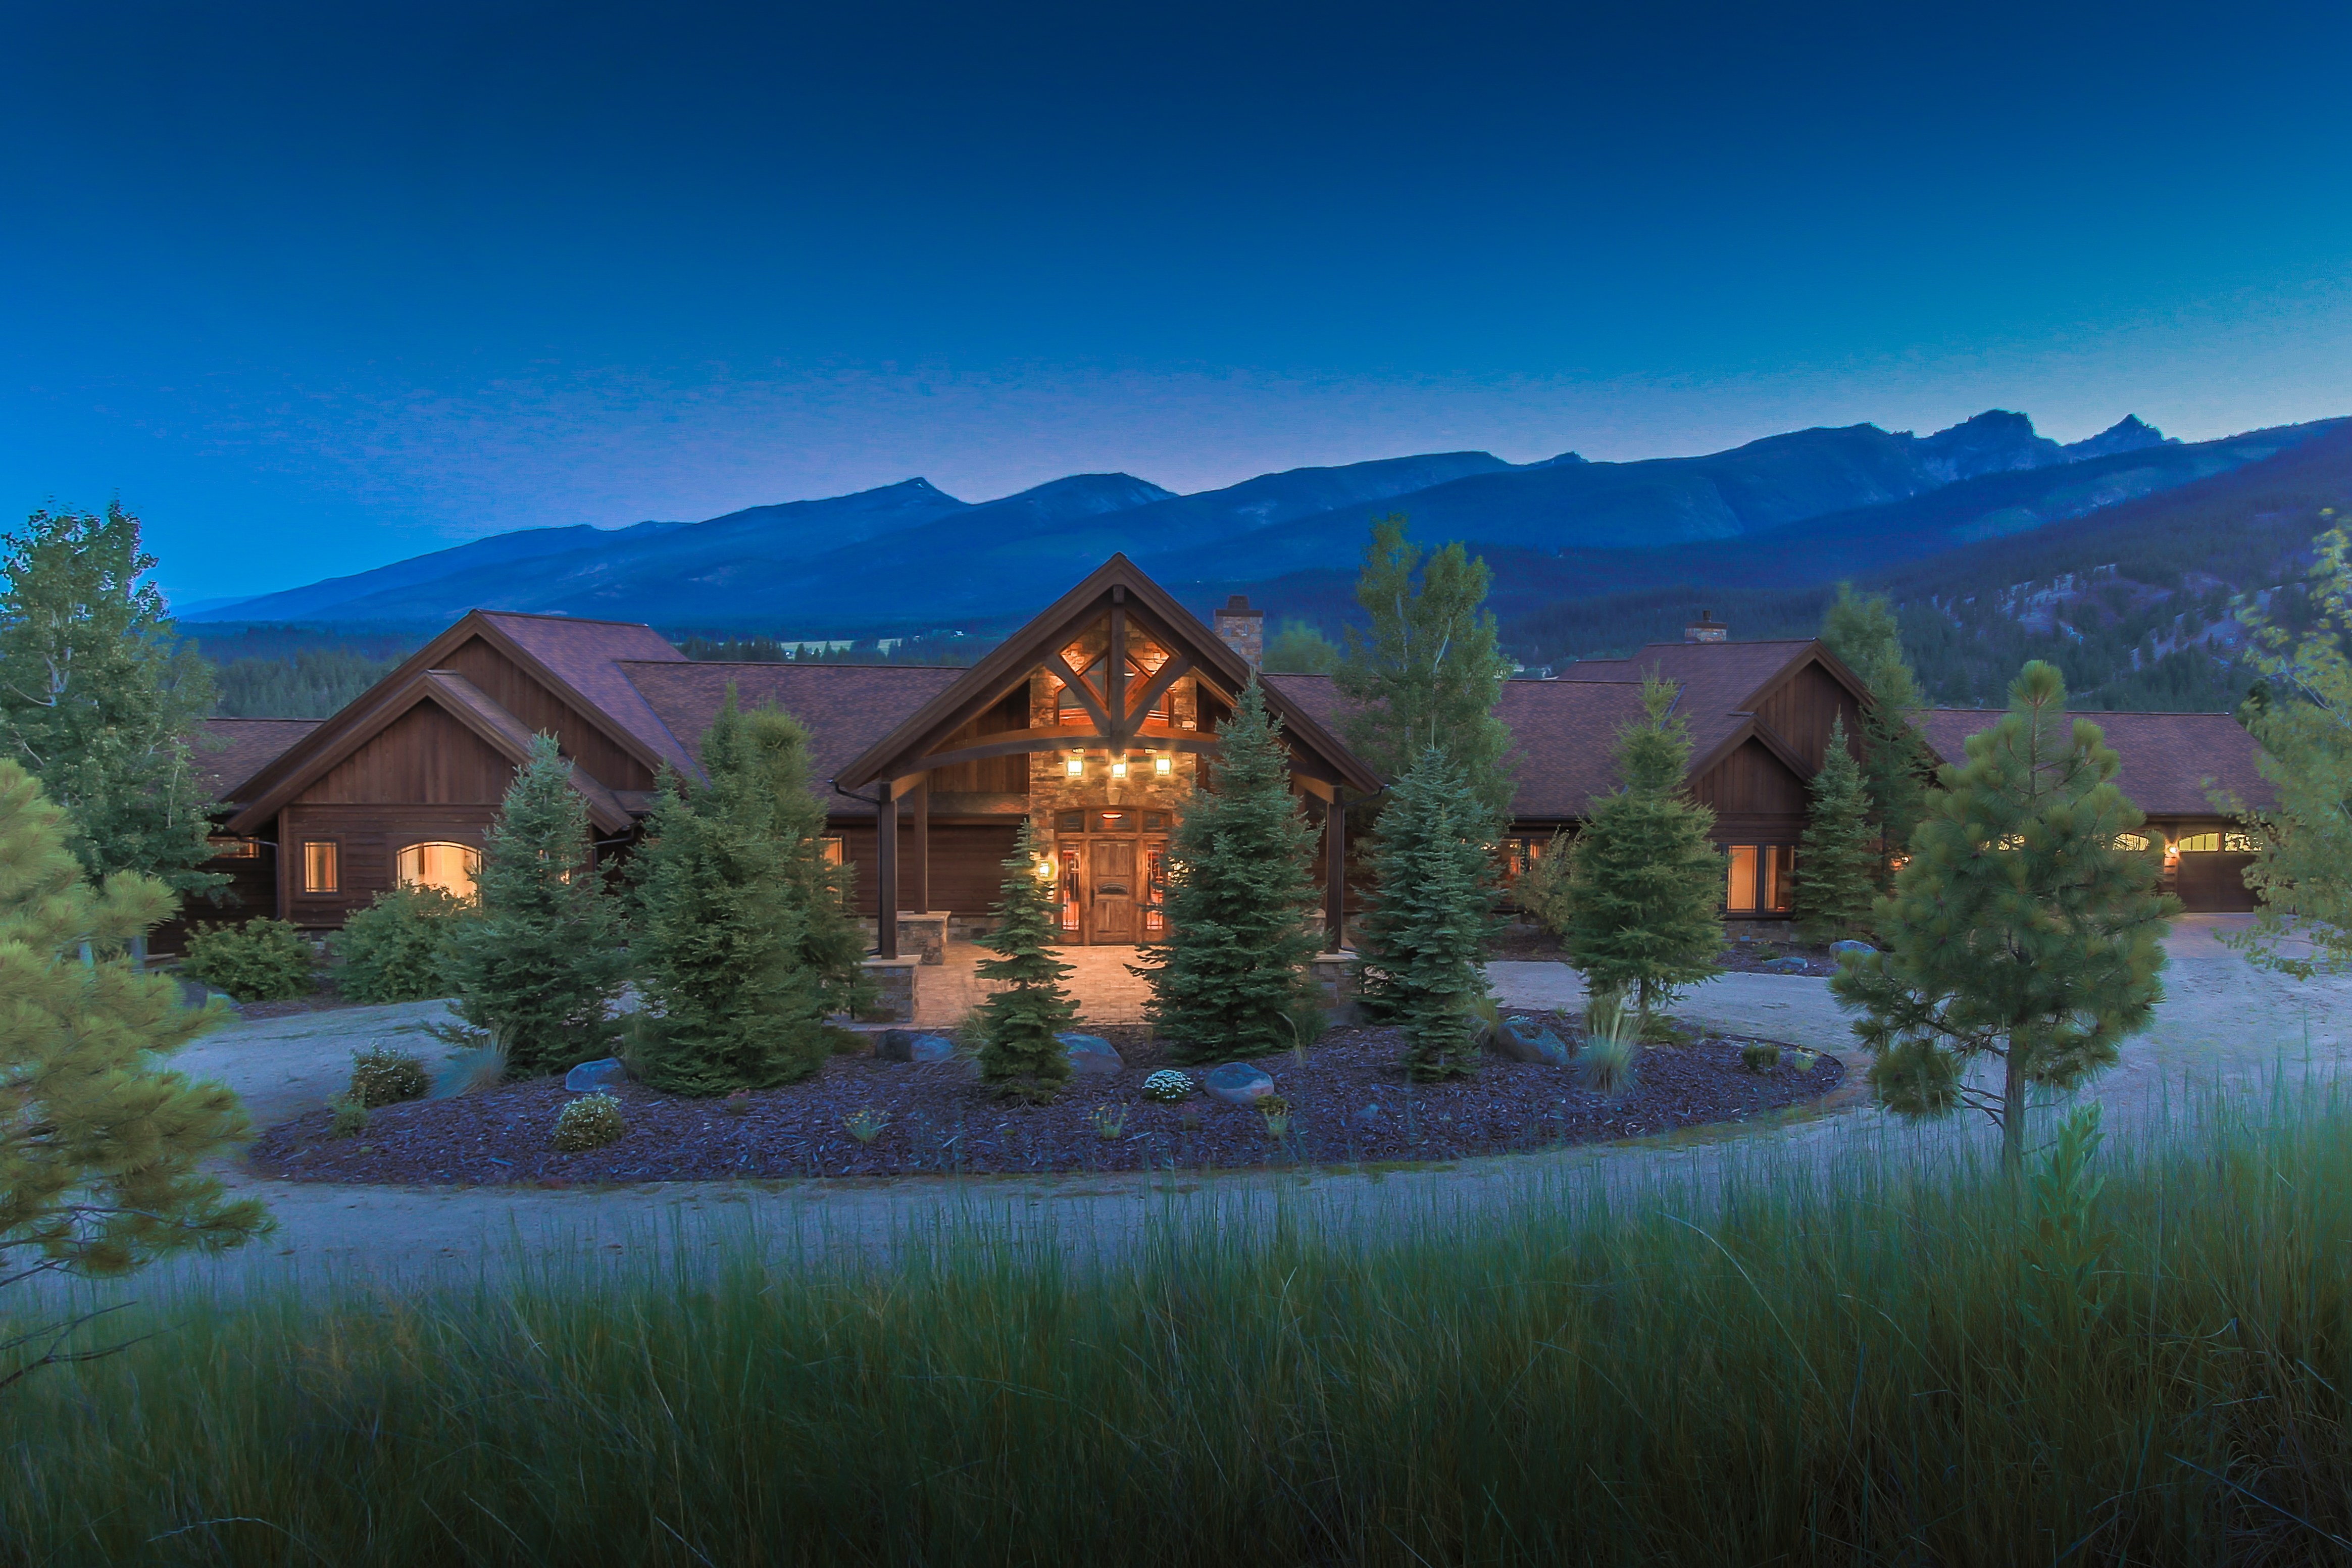 Bitterroot Valley Luxury Estate Offers Mountain Views, Sustainable Living, Tranquil Retreat, Big Sky Outdoor Lifestyle … and the Opportunity to Name Your Price